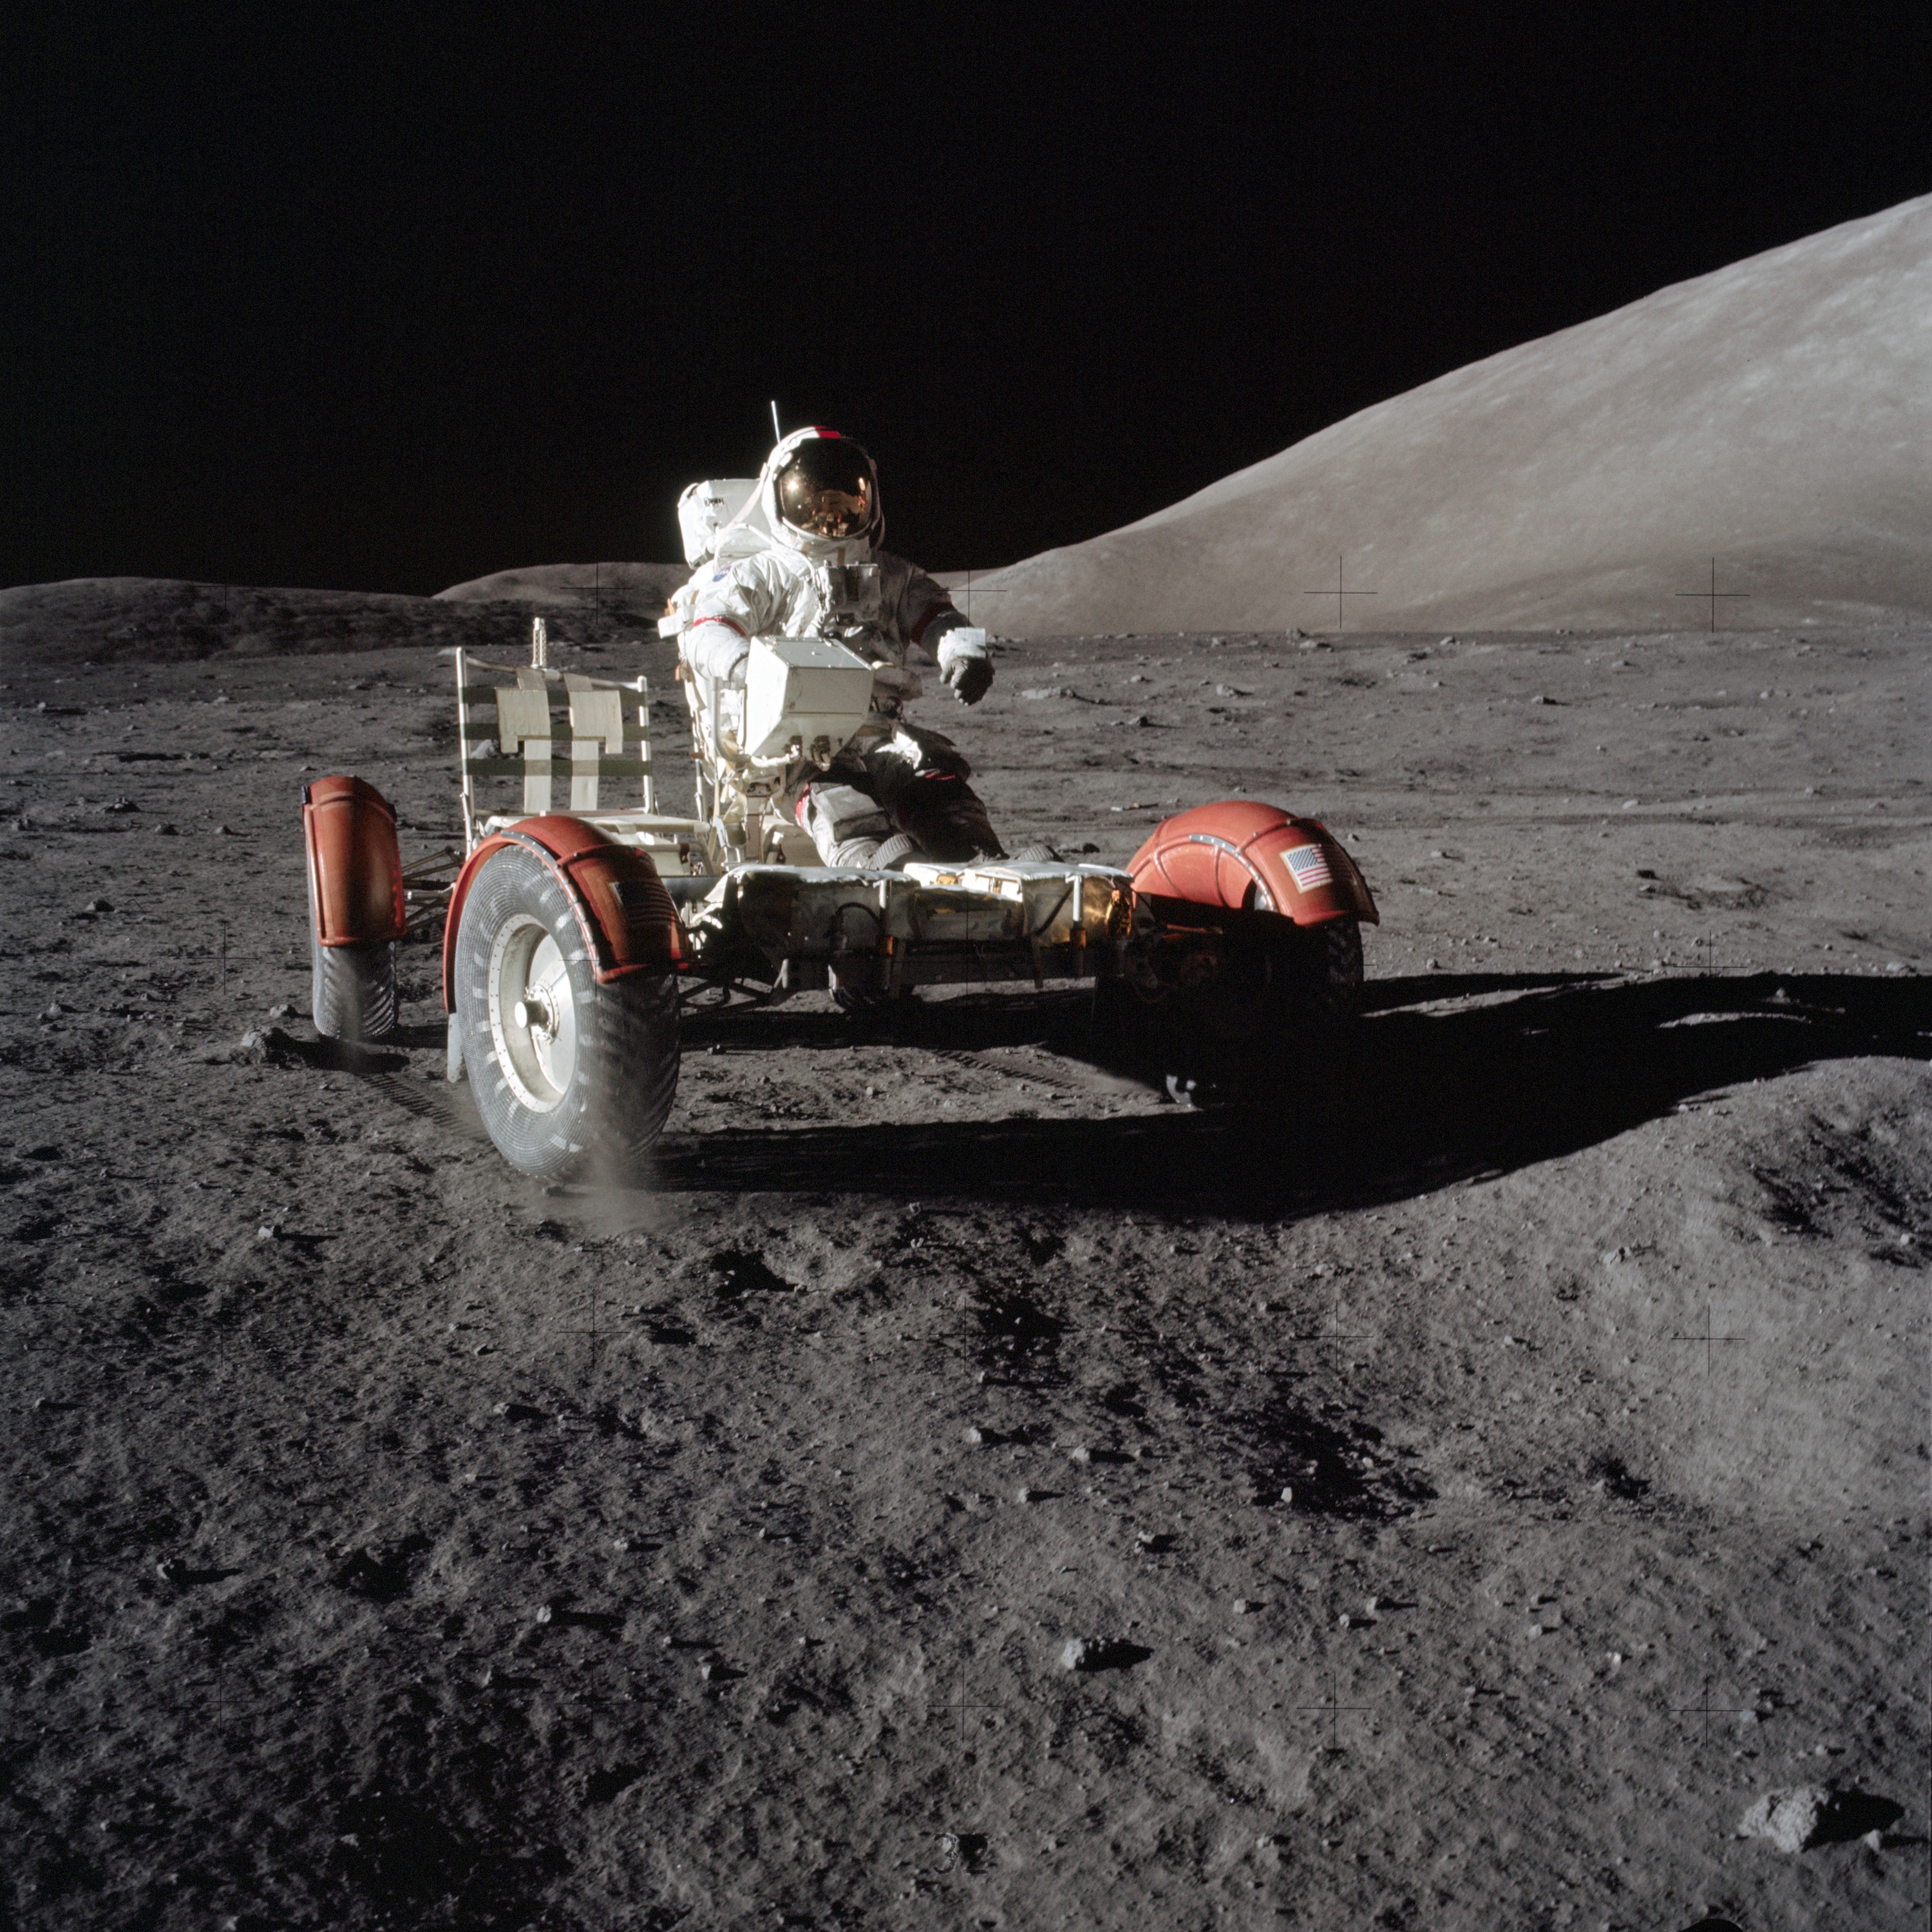 Apollo 17 was the final mission of NASA's Apollo program, the most recent time humans have set foot on the Moon. This image shows an astronaut in the Lunar Excursion Module (LEM) within the Taurus-Littrow Valley. A key scientific goal of the mission was to collect rock samples from the Serenitatis basin rim to find out exactly how old it is.